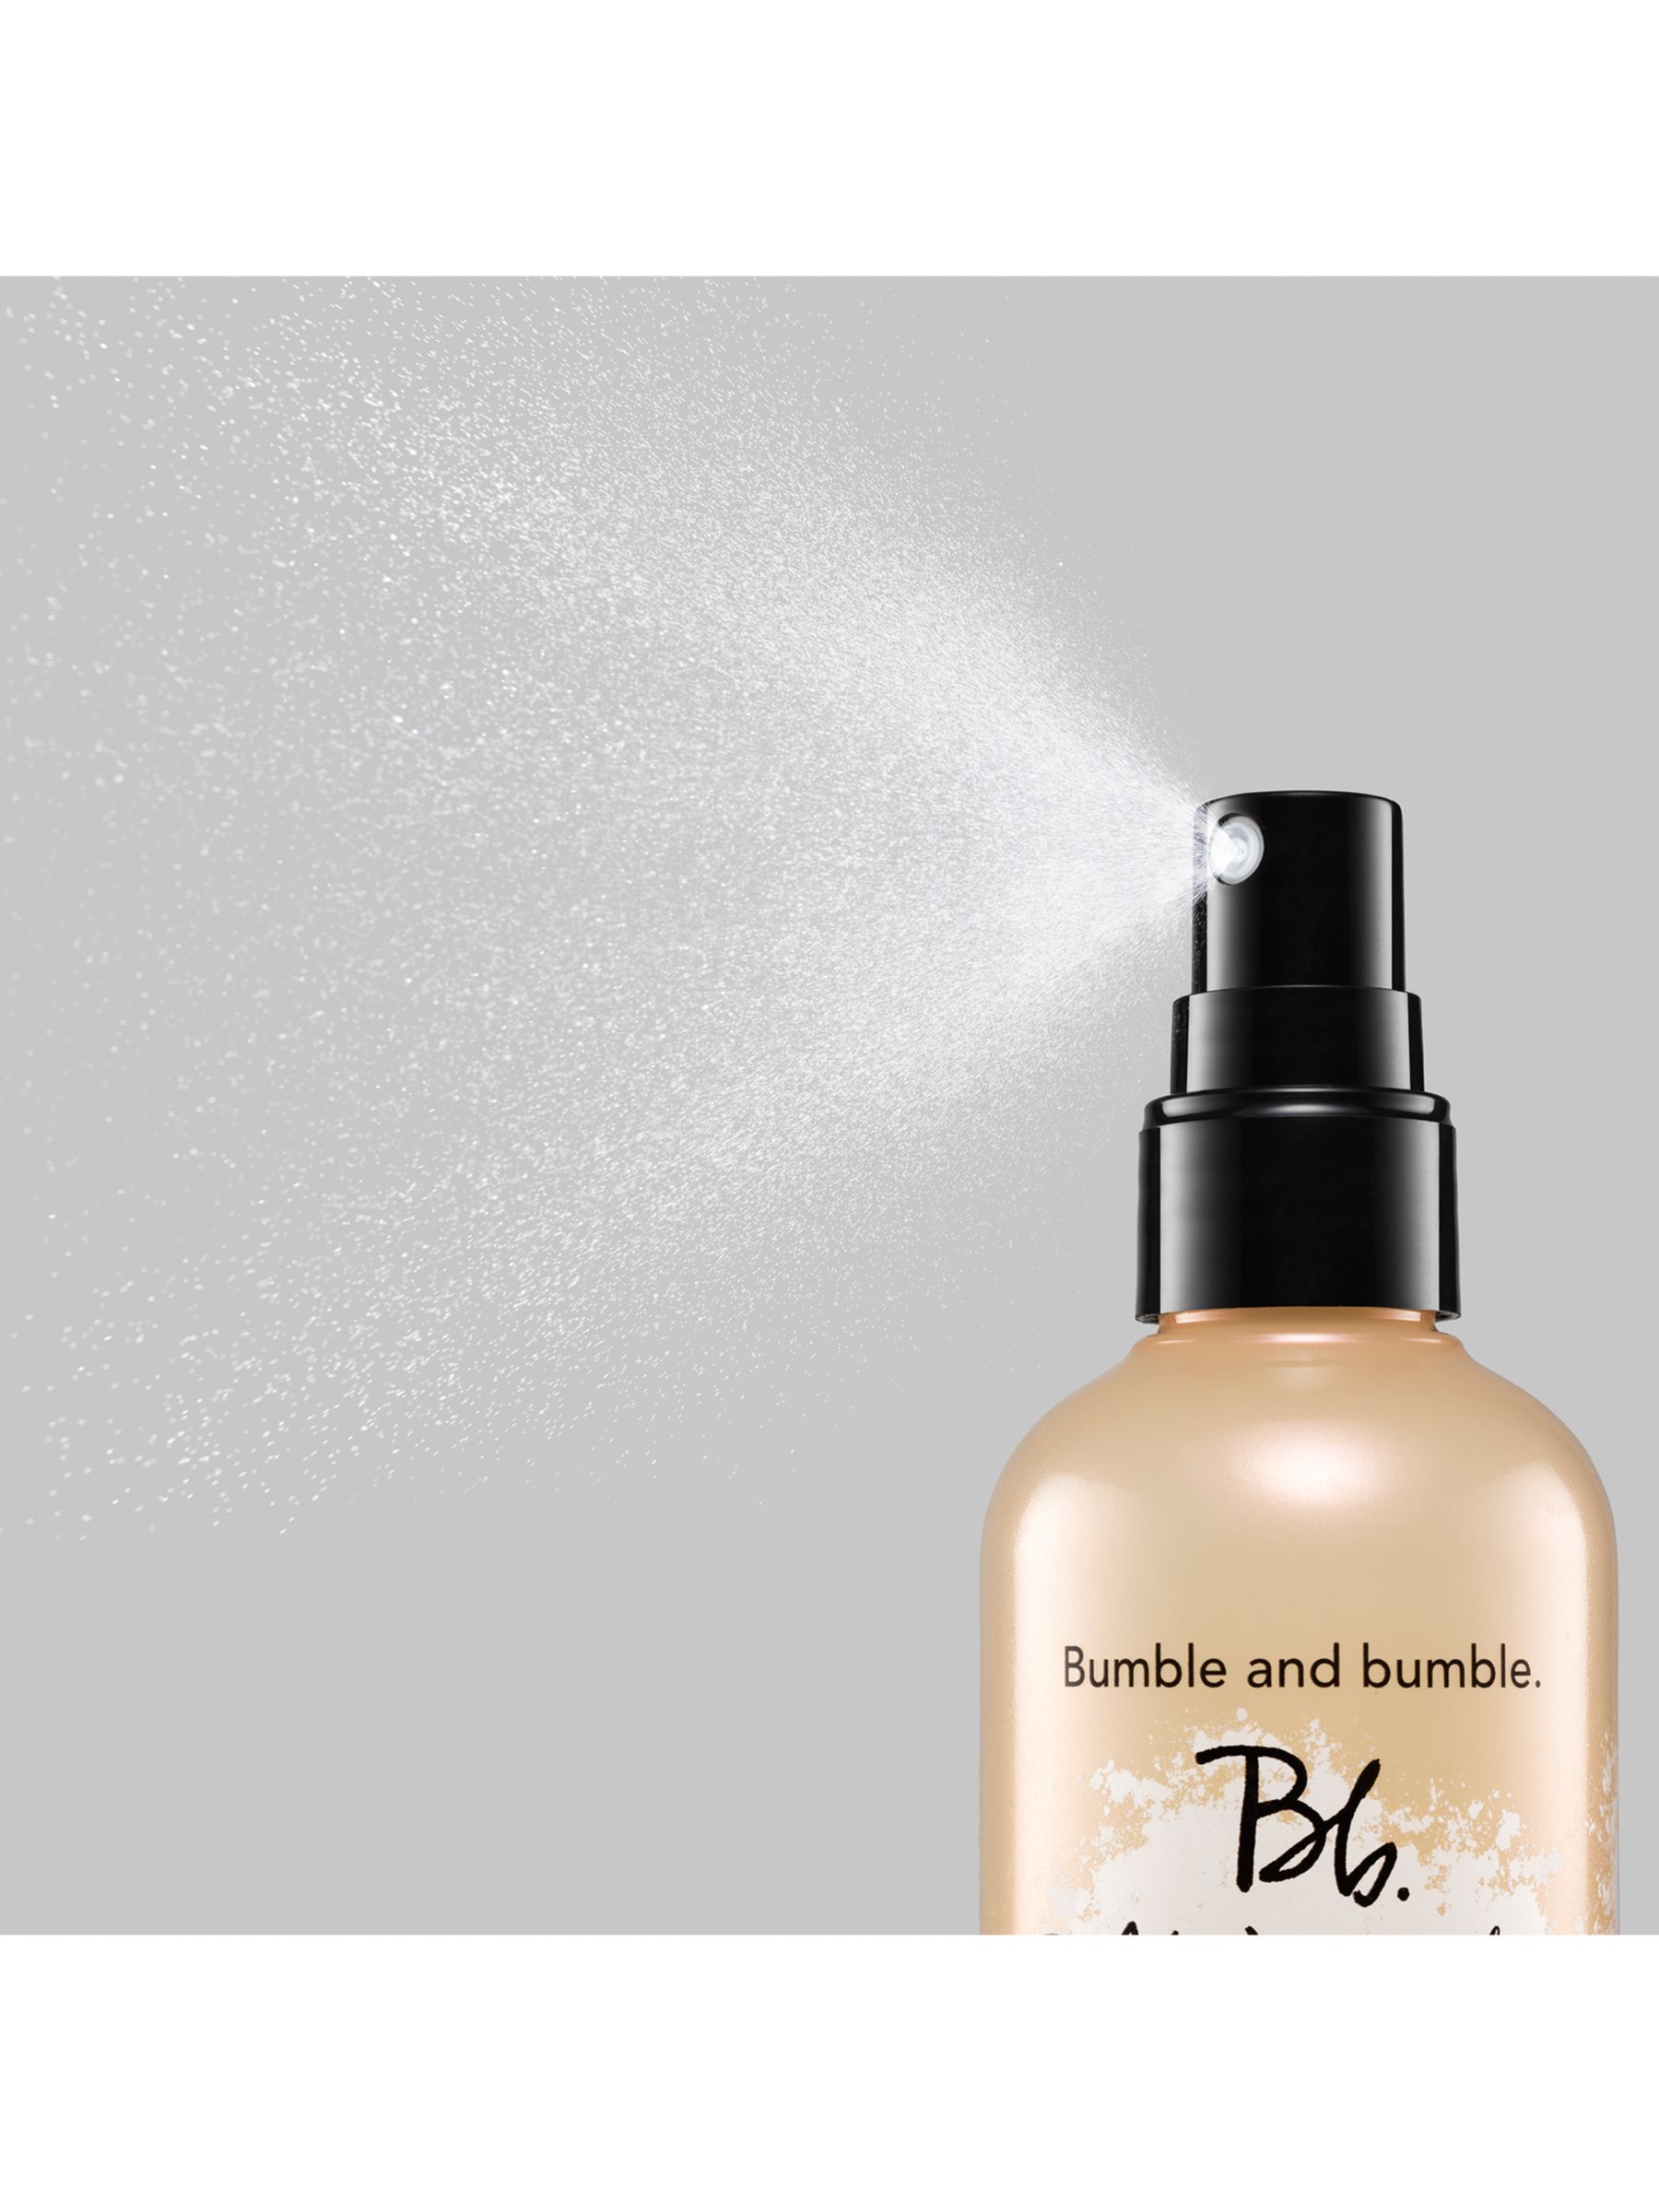 historie smag lejr Bumble and bumble Pret A Powder Post Workout Dry Shampoo Mist, 120ml at  John Lewis & Partners